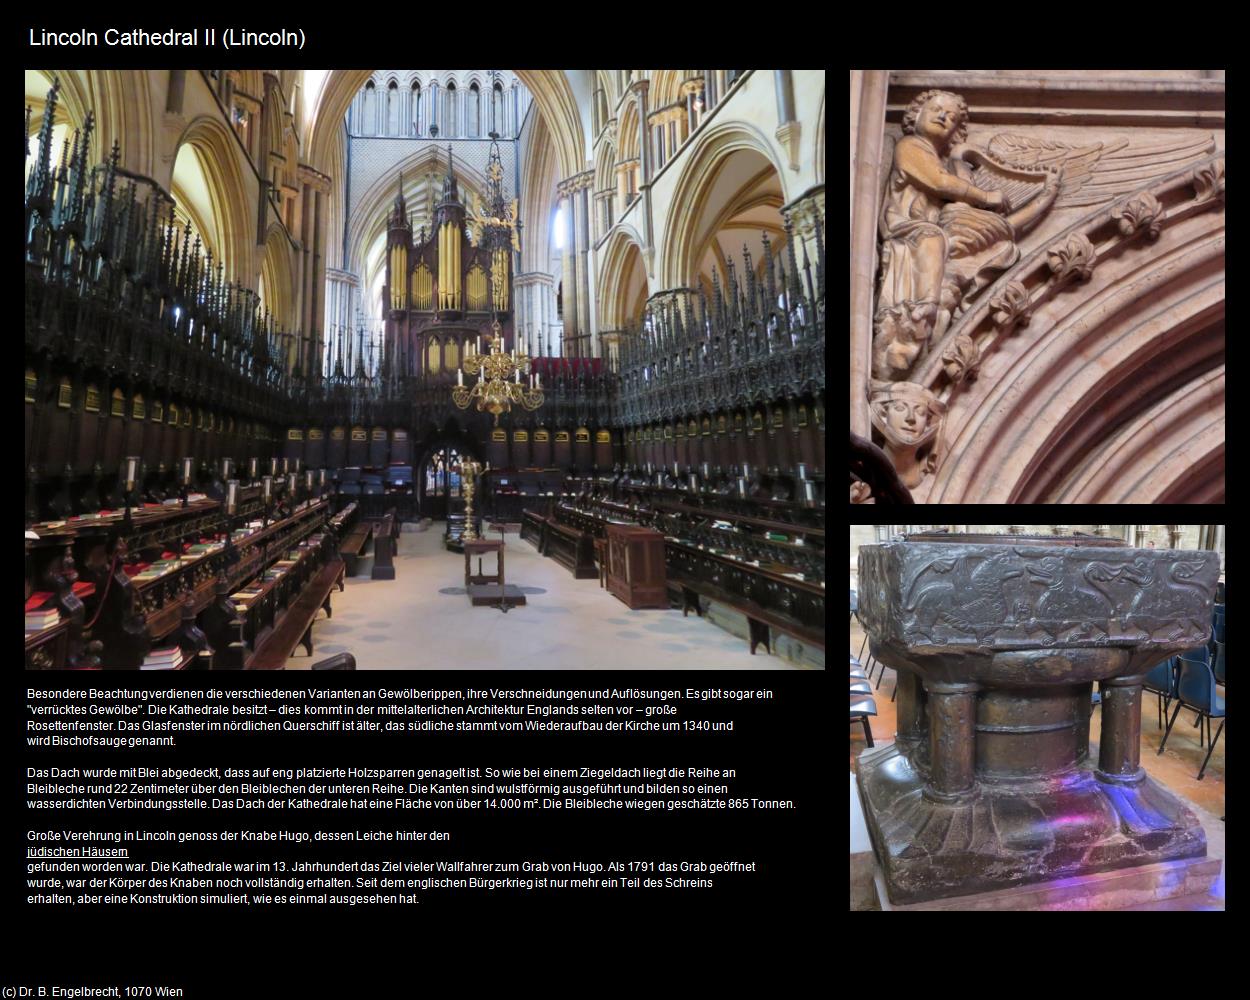 Lincoln Cathedral II (Lincoln, England) in Kulturatlas-ENGLAND und WALES(c)B.Engelbrecht